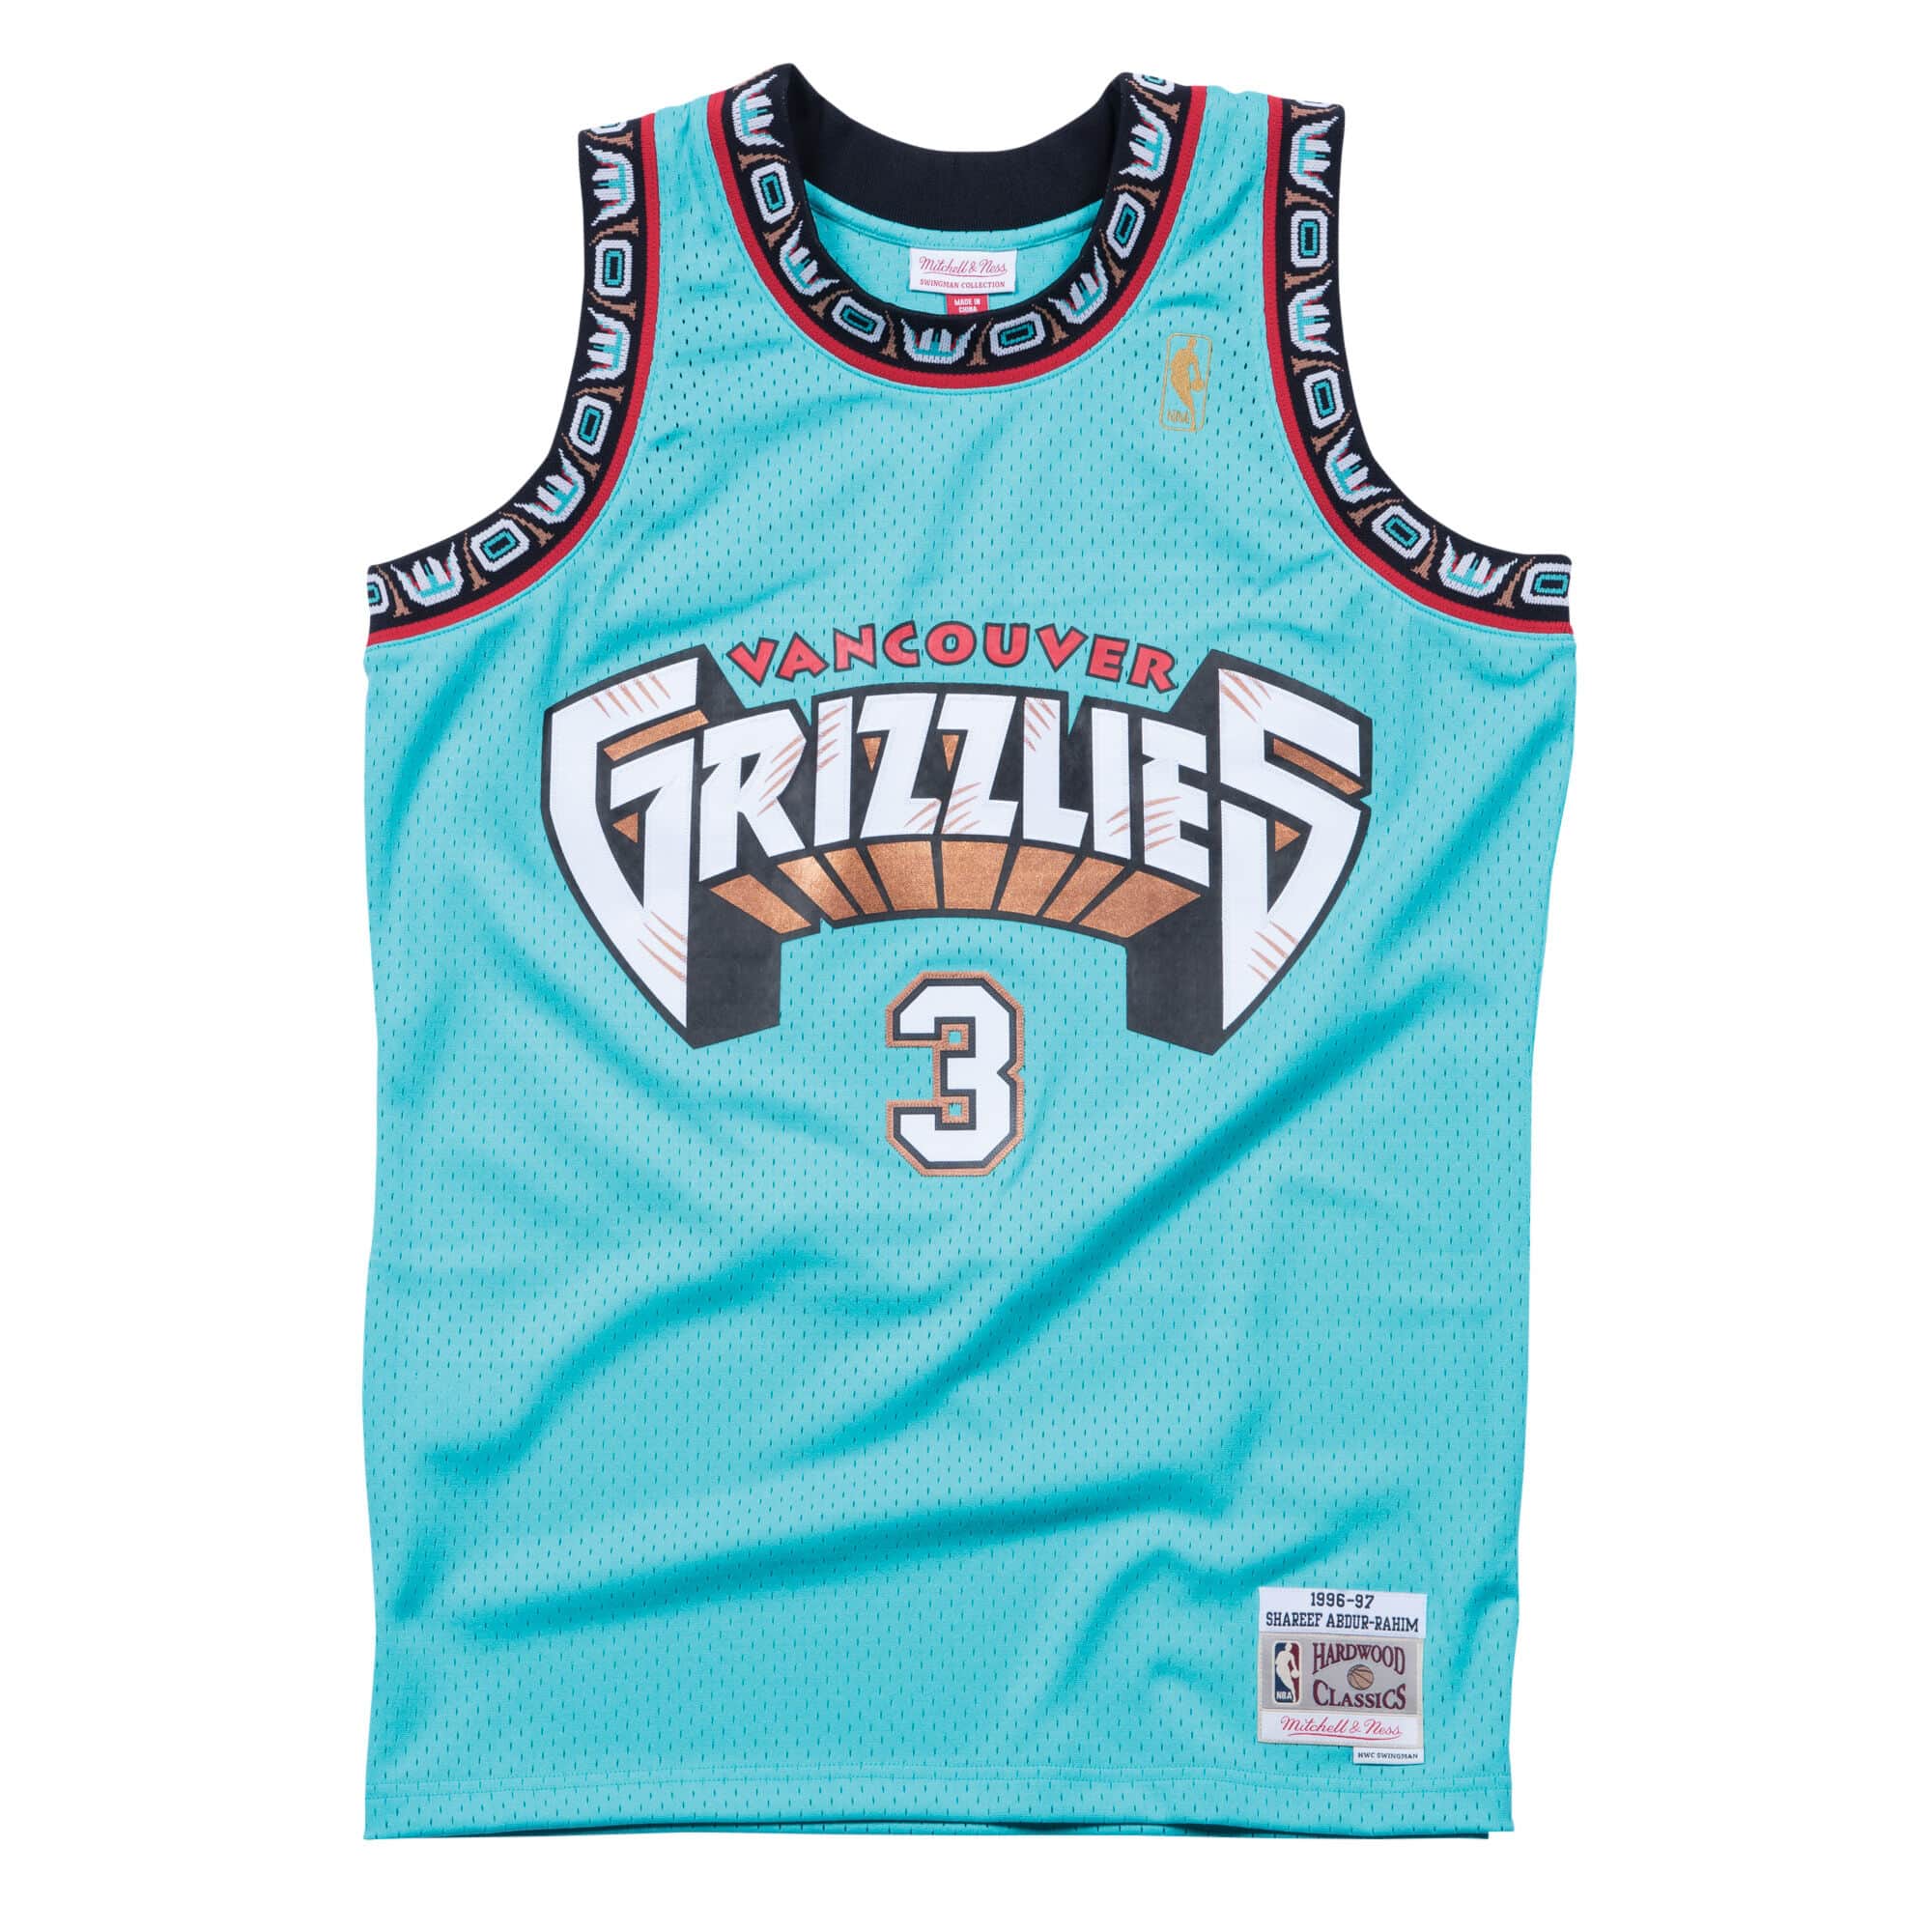 Vancouver Grizzlies Shareef Abdur-Rahim black jersey-NBA NWT by